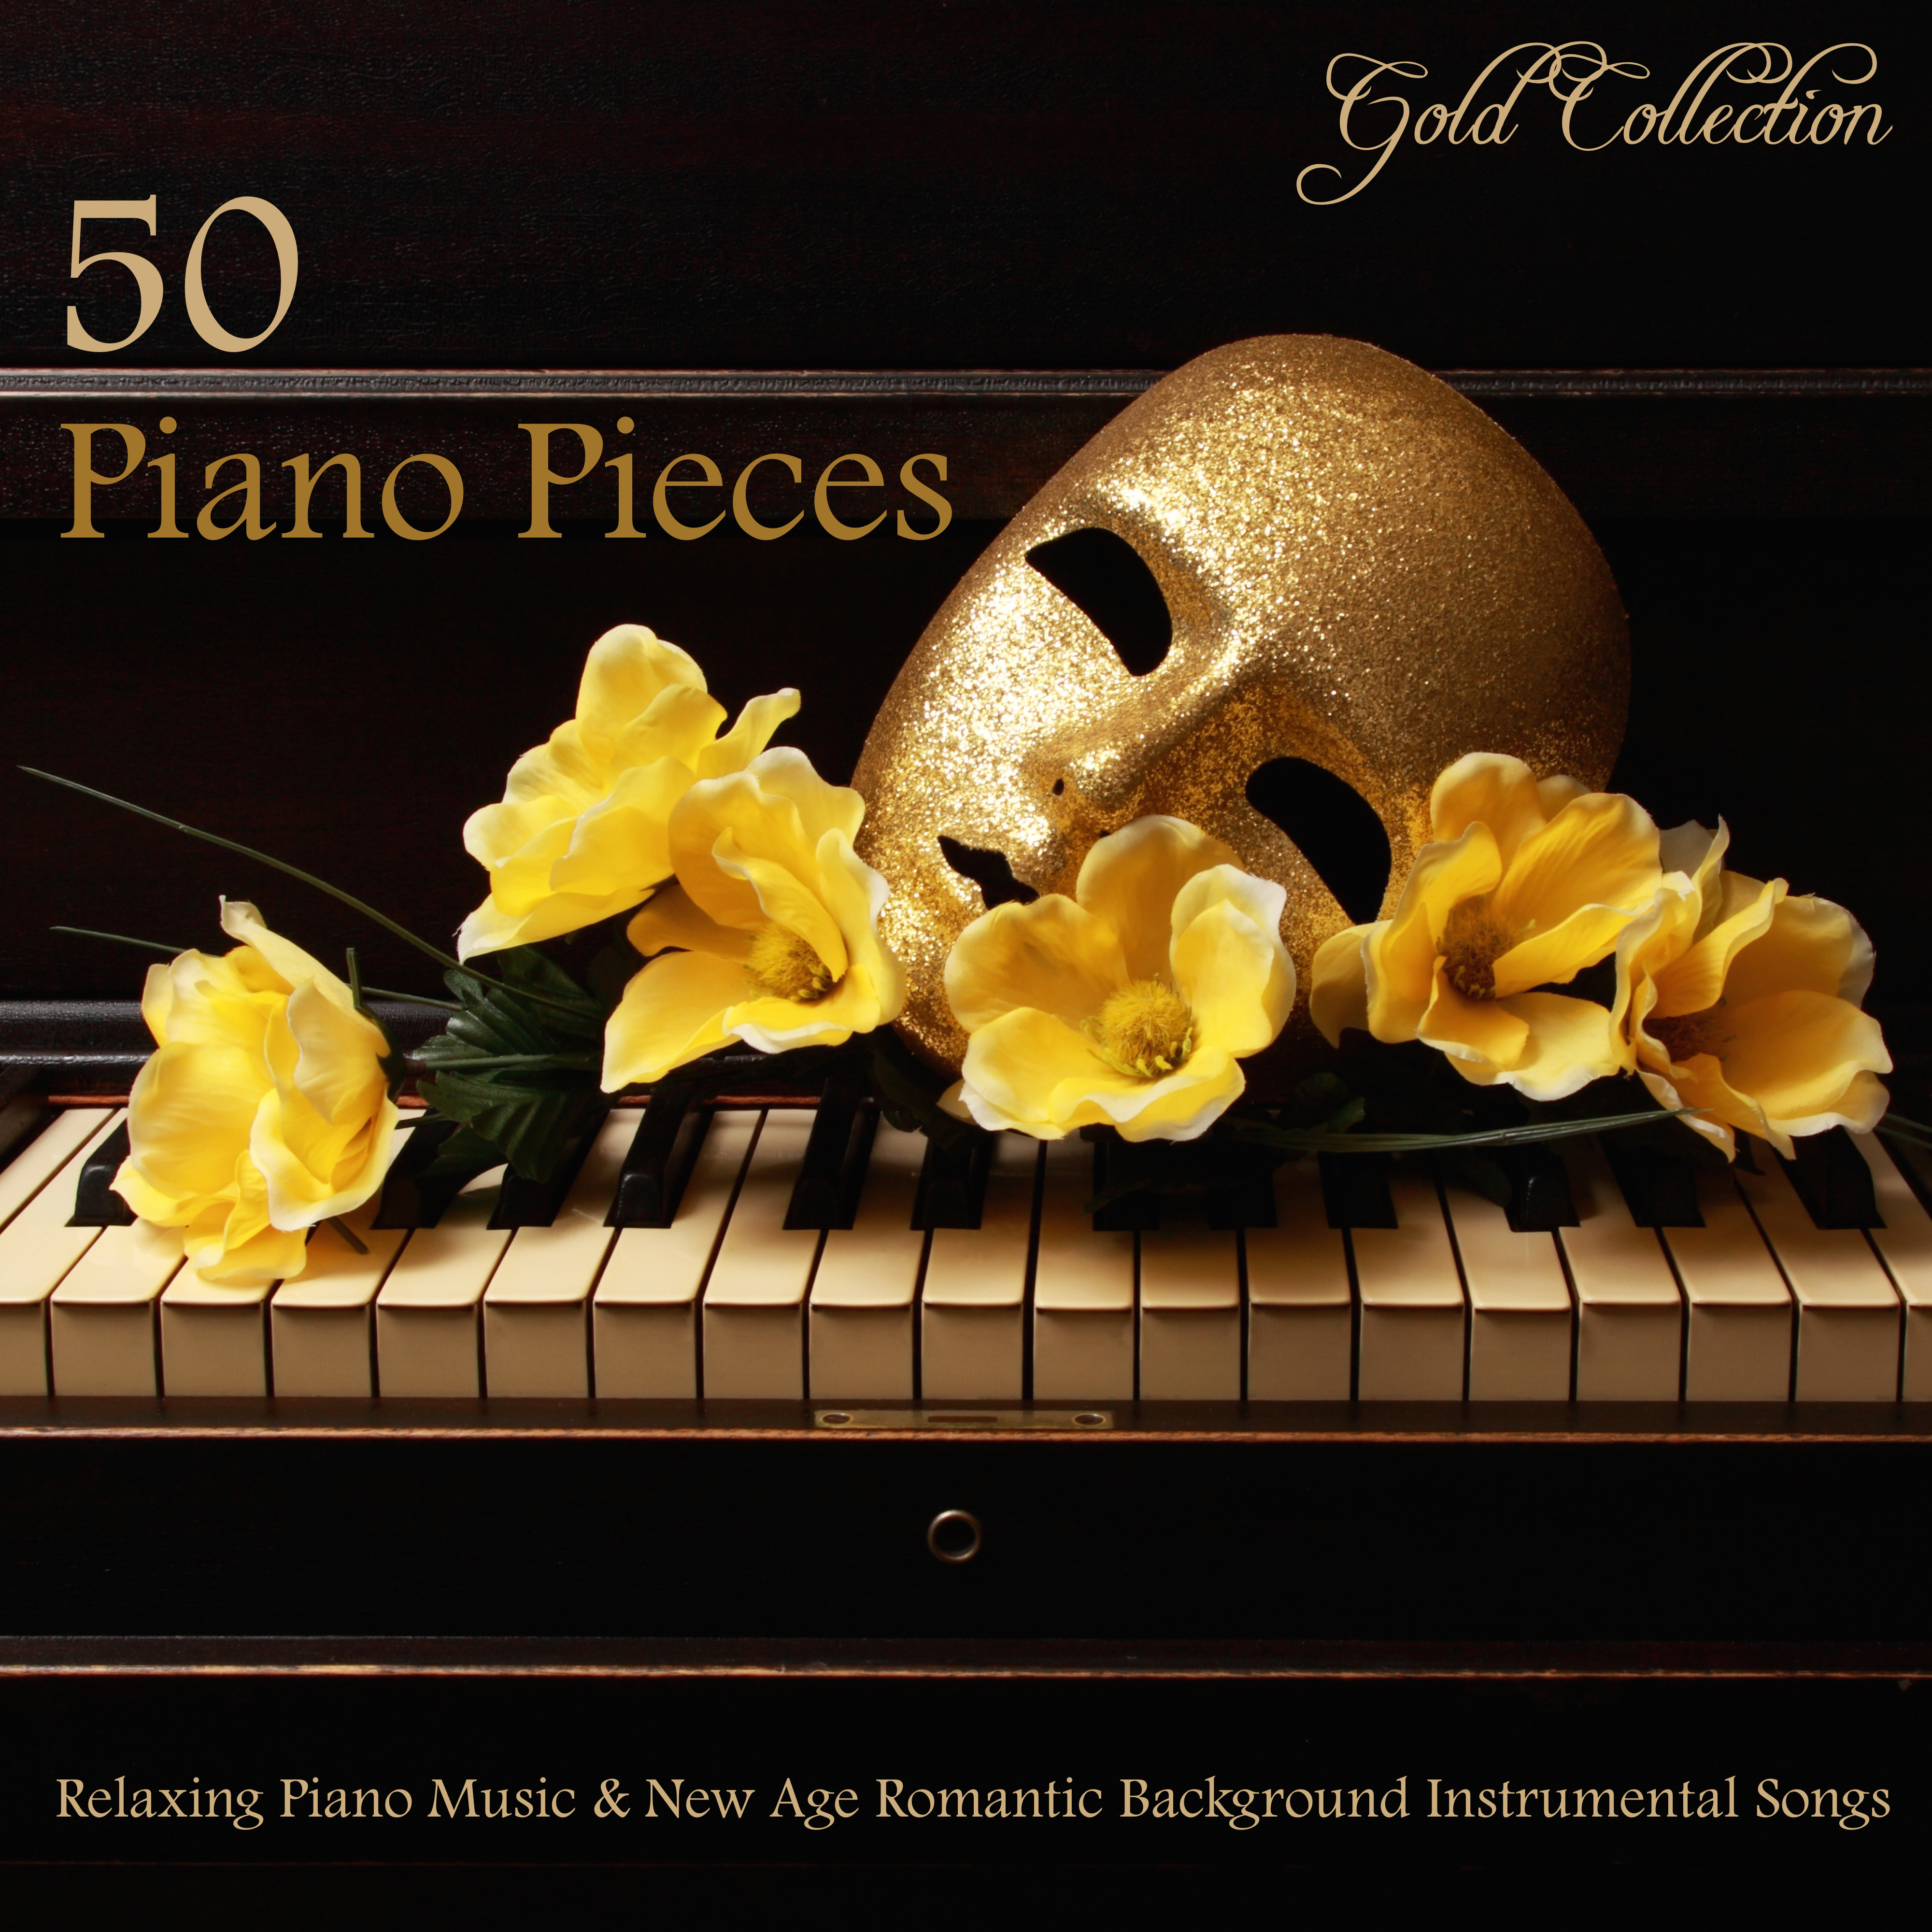 50 Piano Pieces - Relaxing Piano Music & New Age Romantic Background Instrumental Songs (Gold Collection)